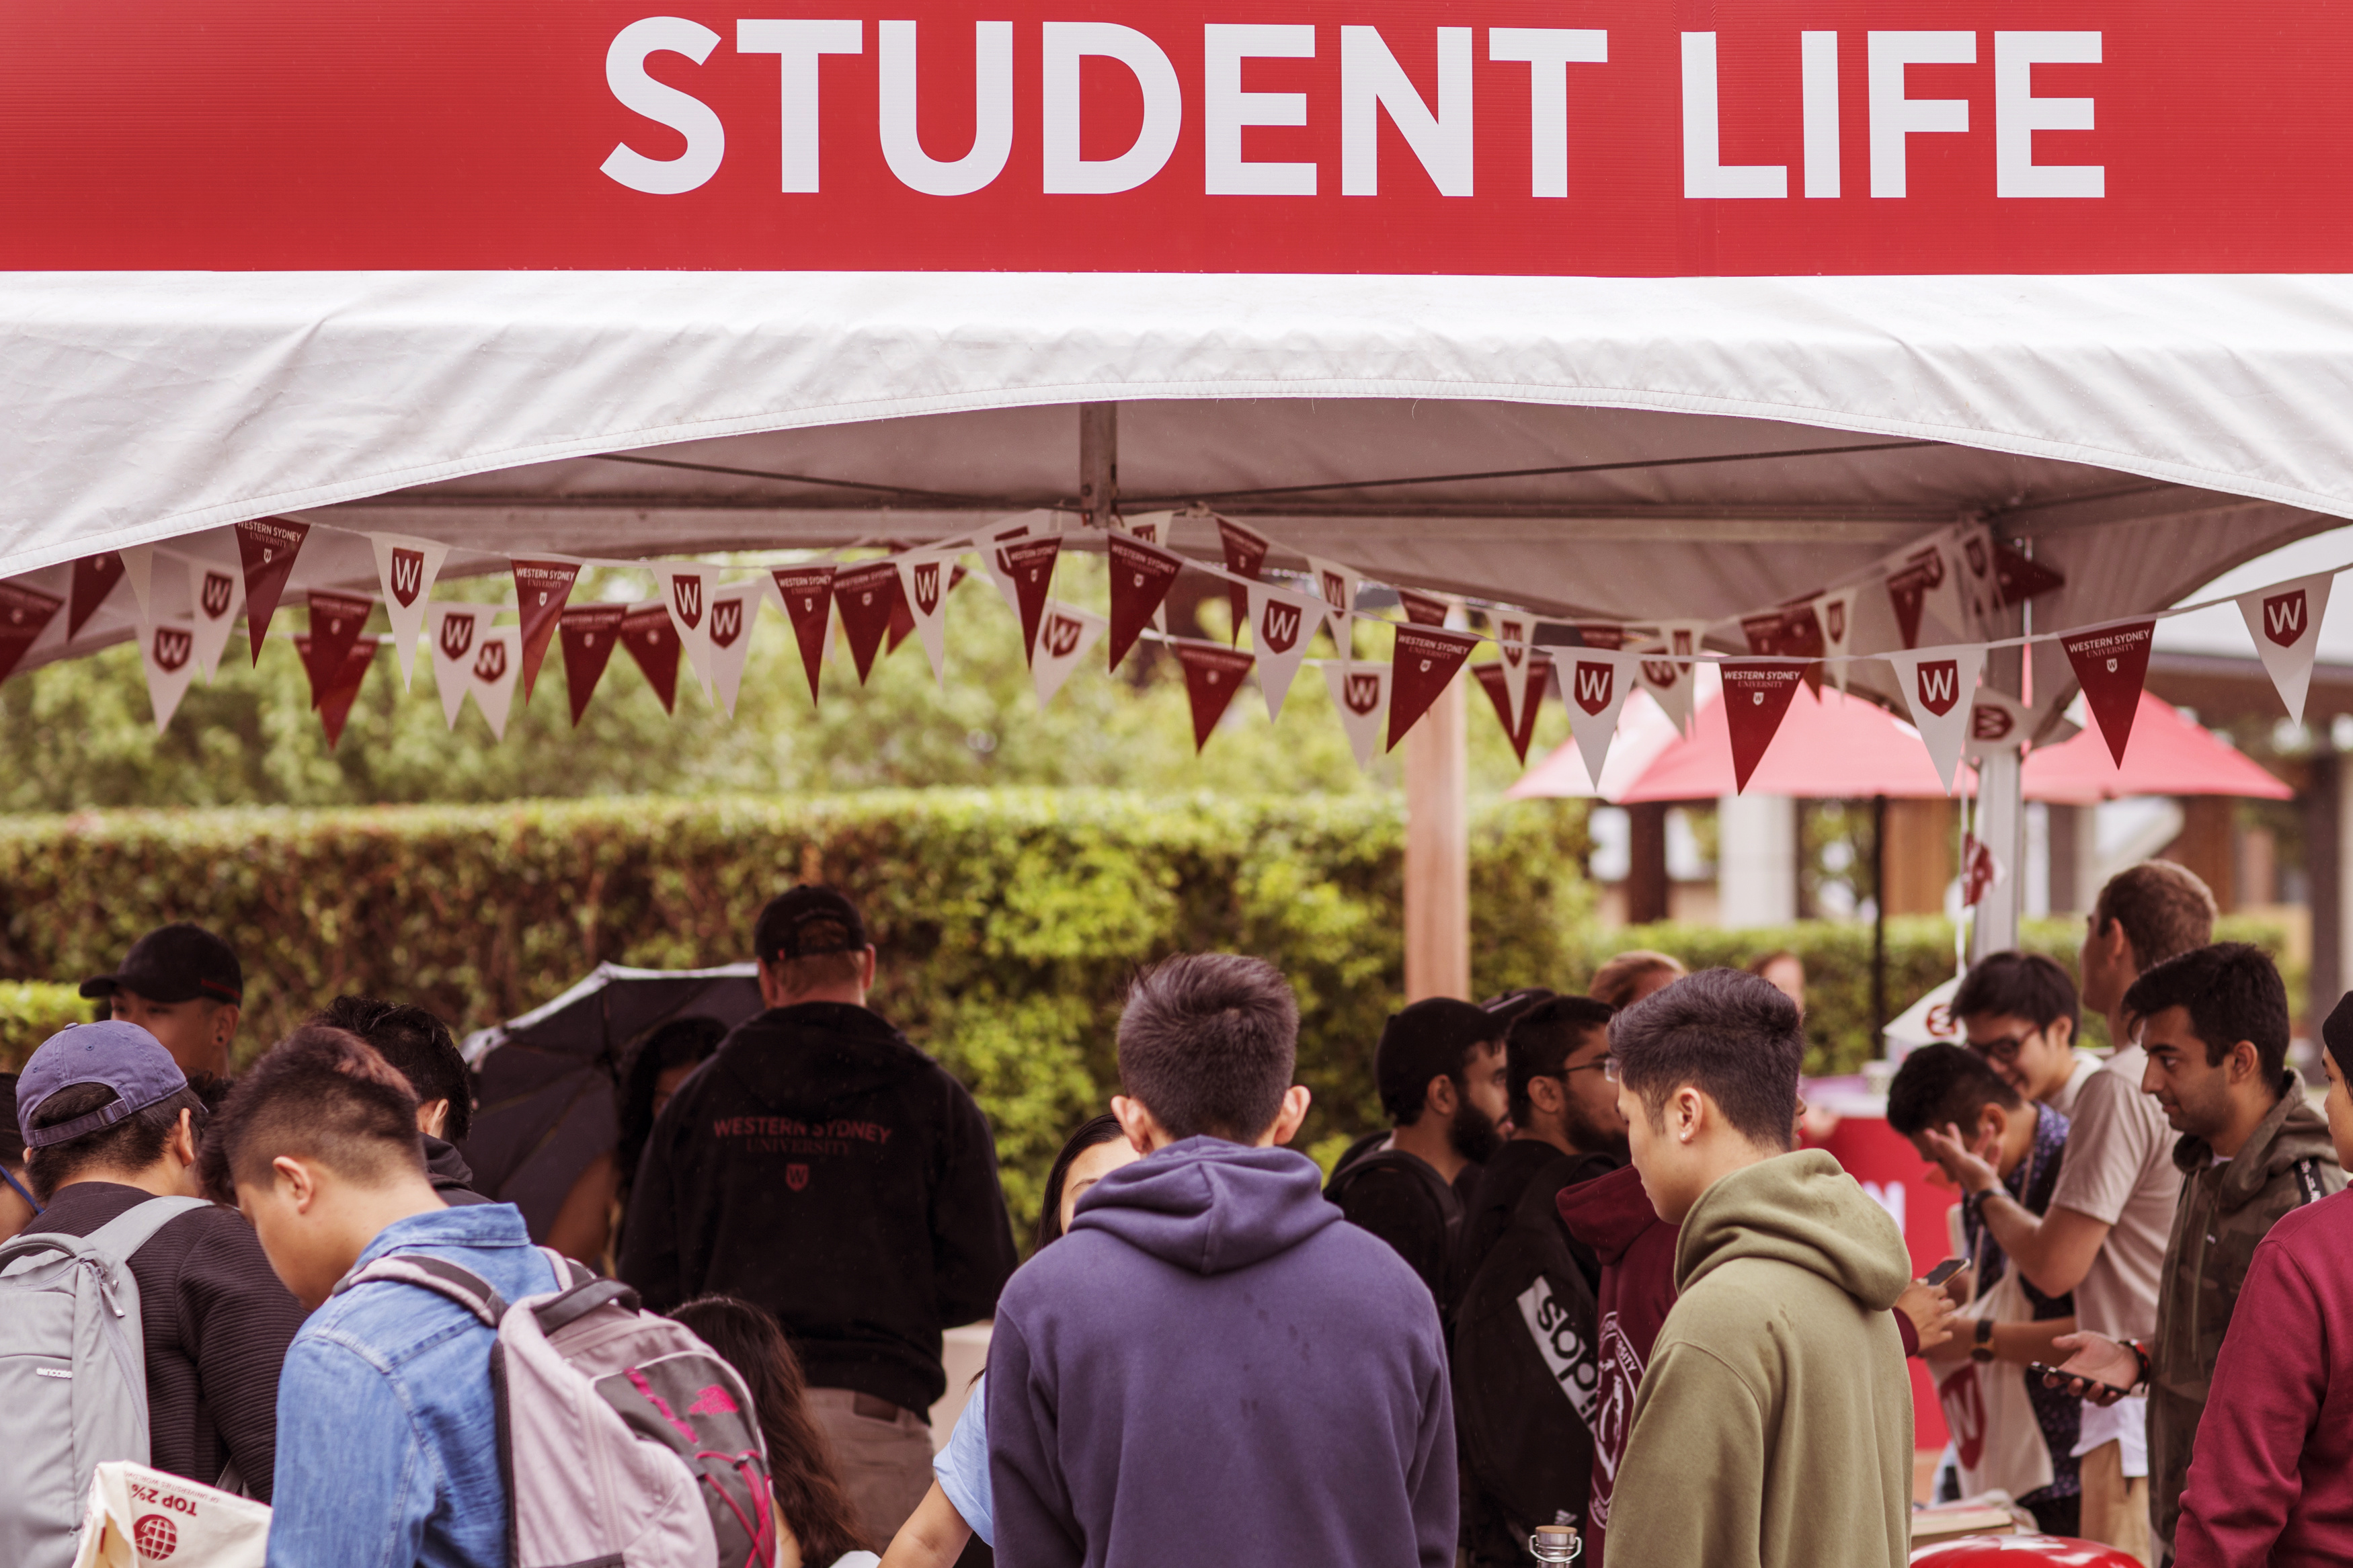 Student life sign with students on campus